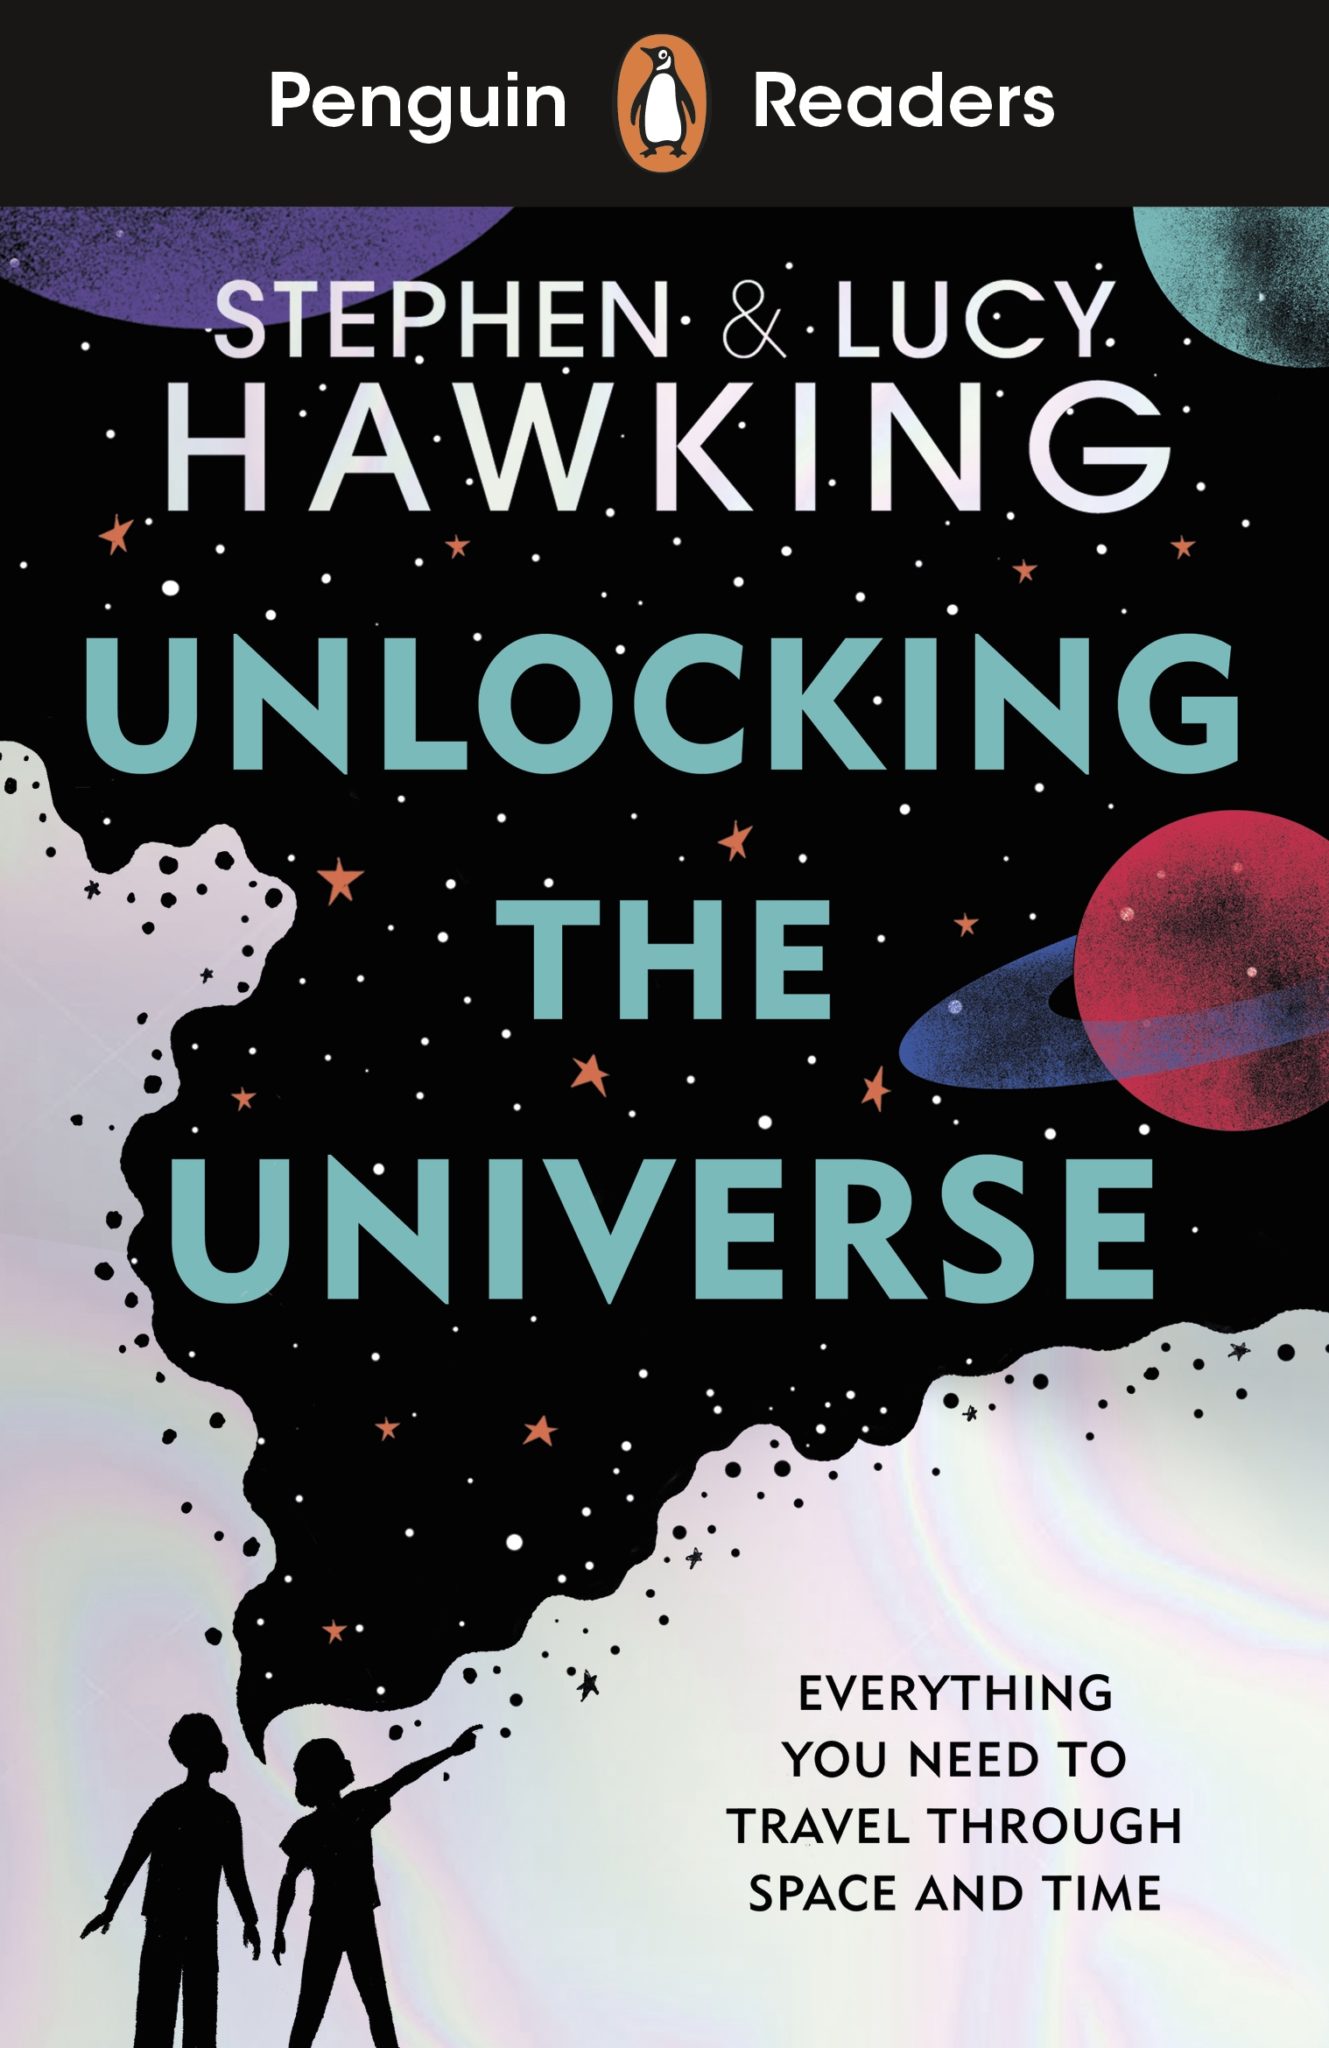 Penguin Readers for EAL: Level 5 Unlocking the Universe